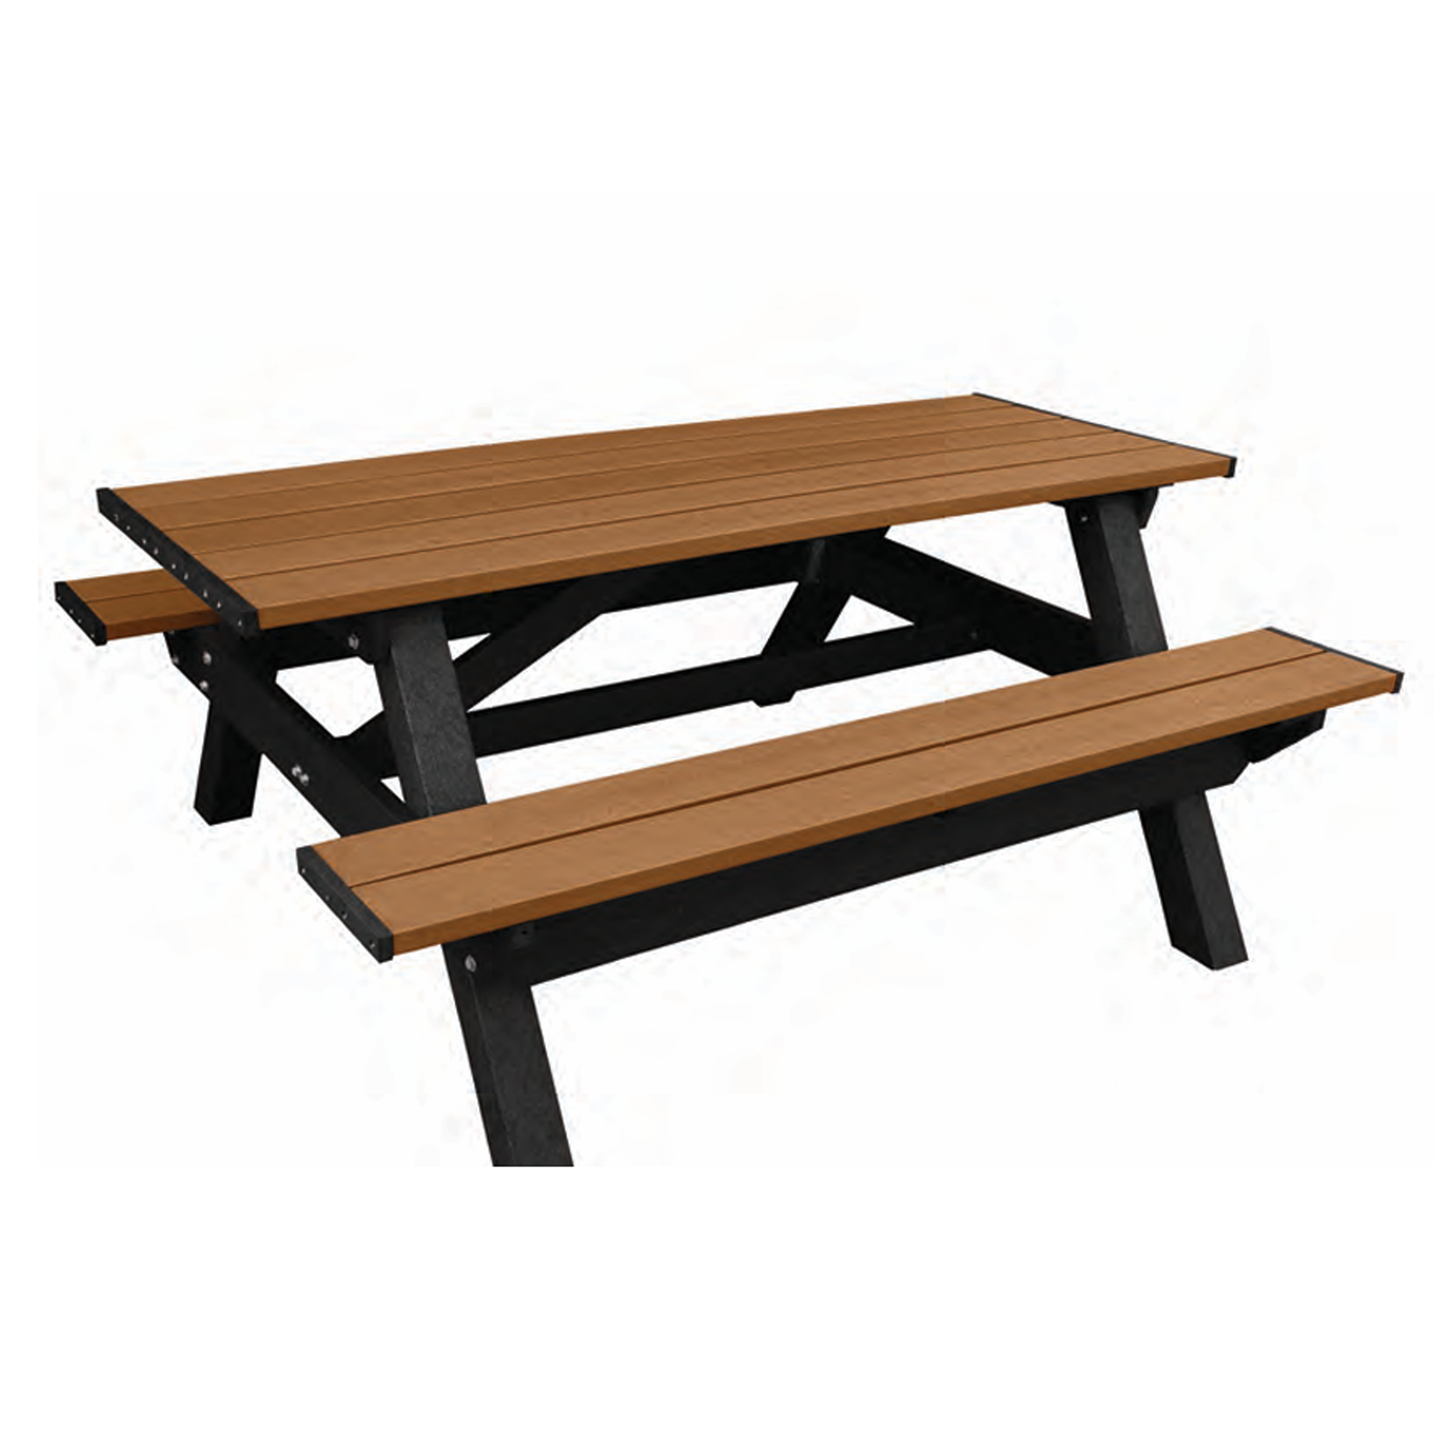 6' Poly Picnic Table